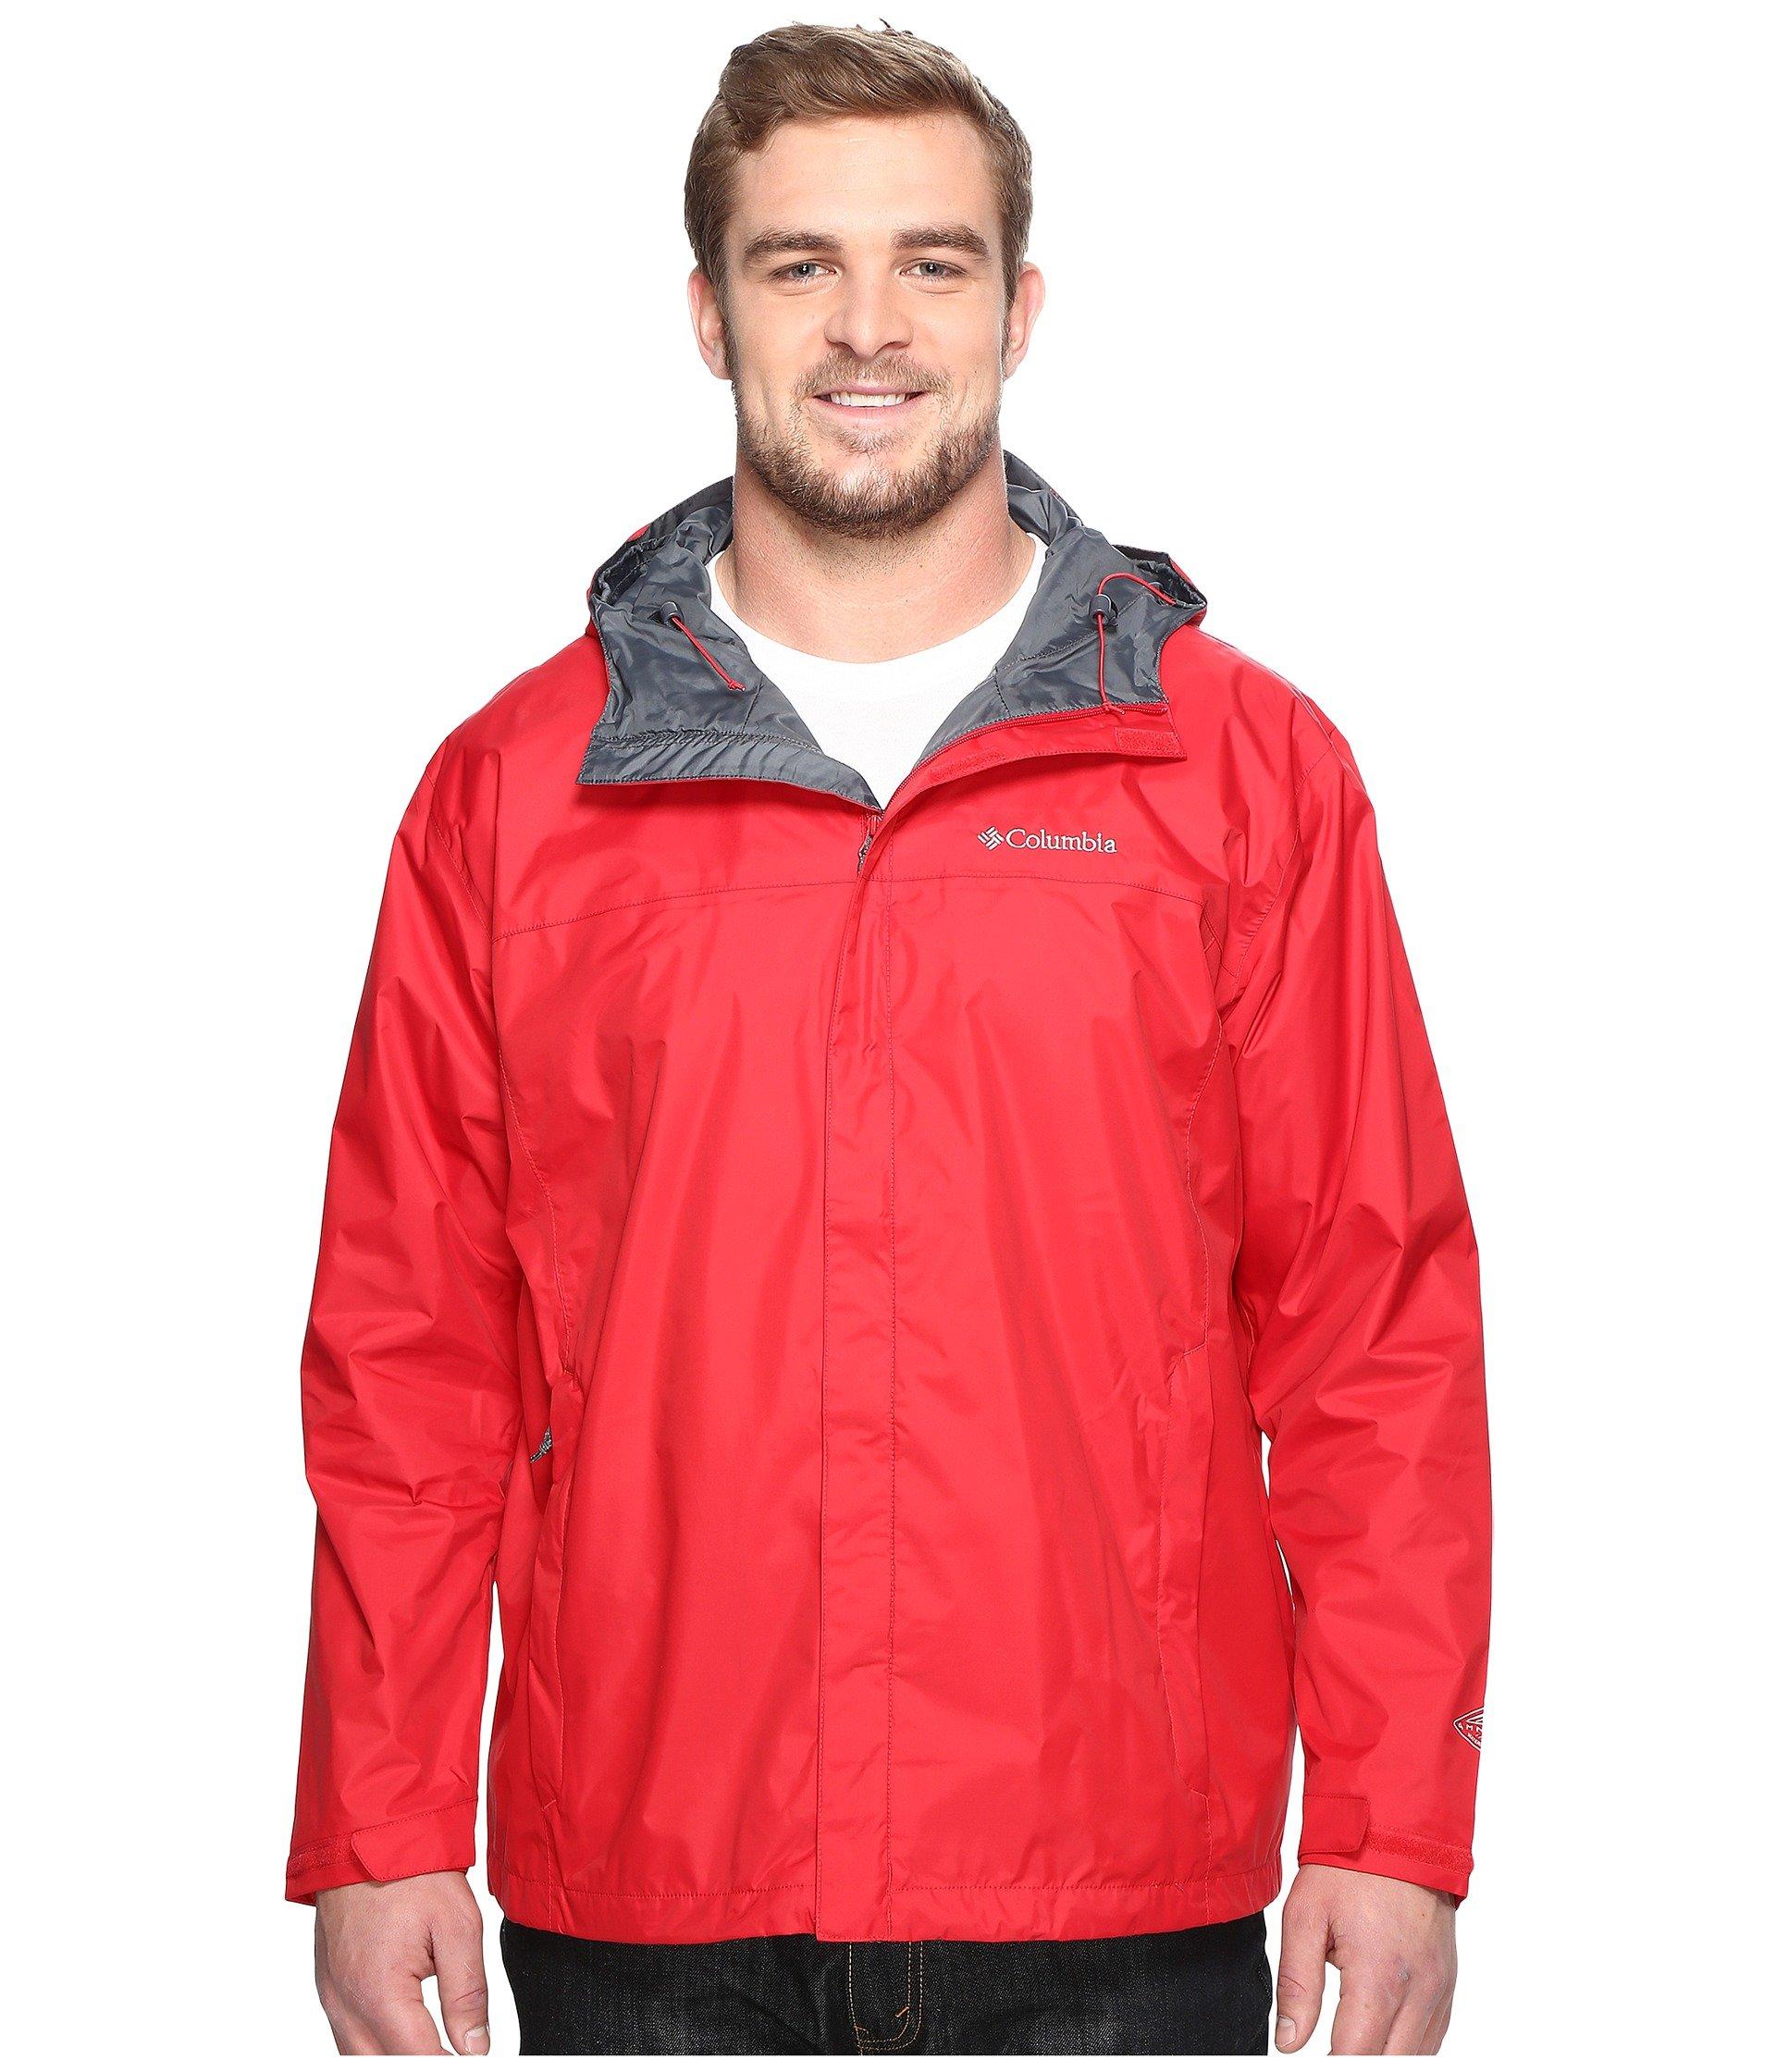 Columbia Synthetic Rain Jacket in Red for Men - Save 7% - Lyst